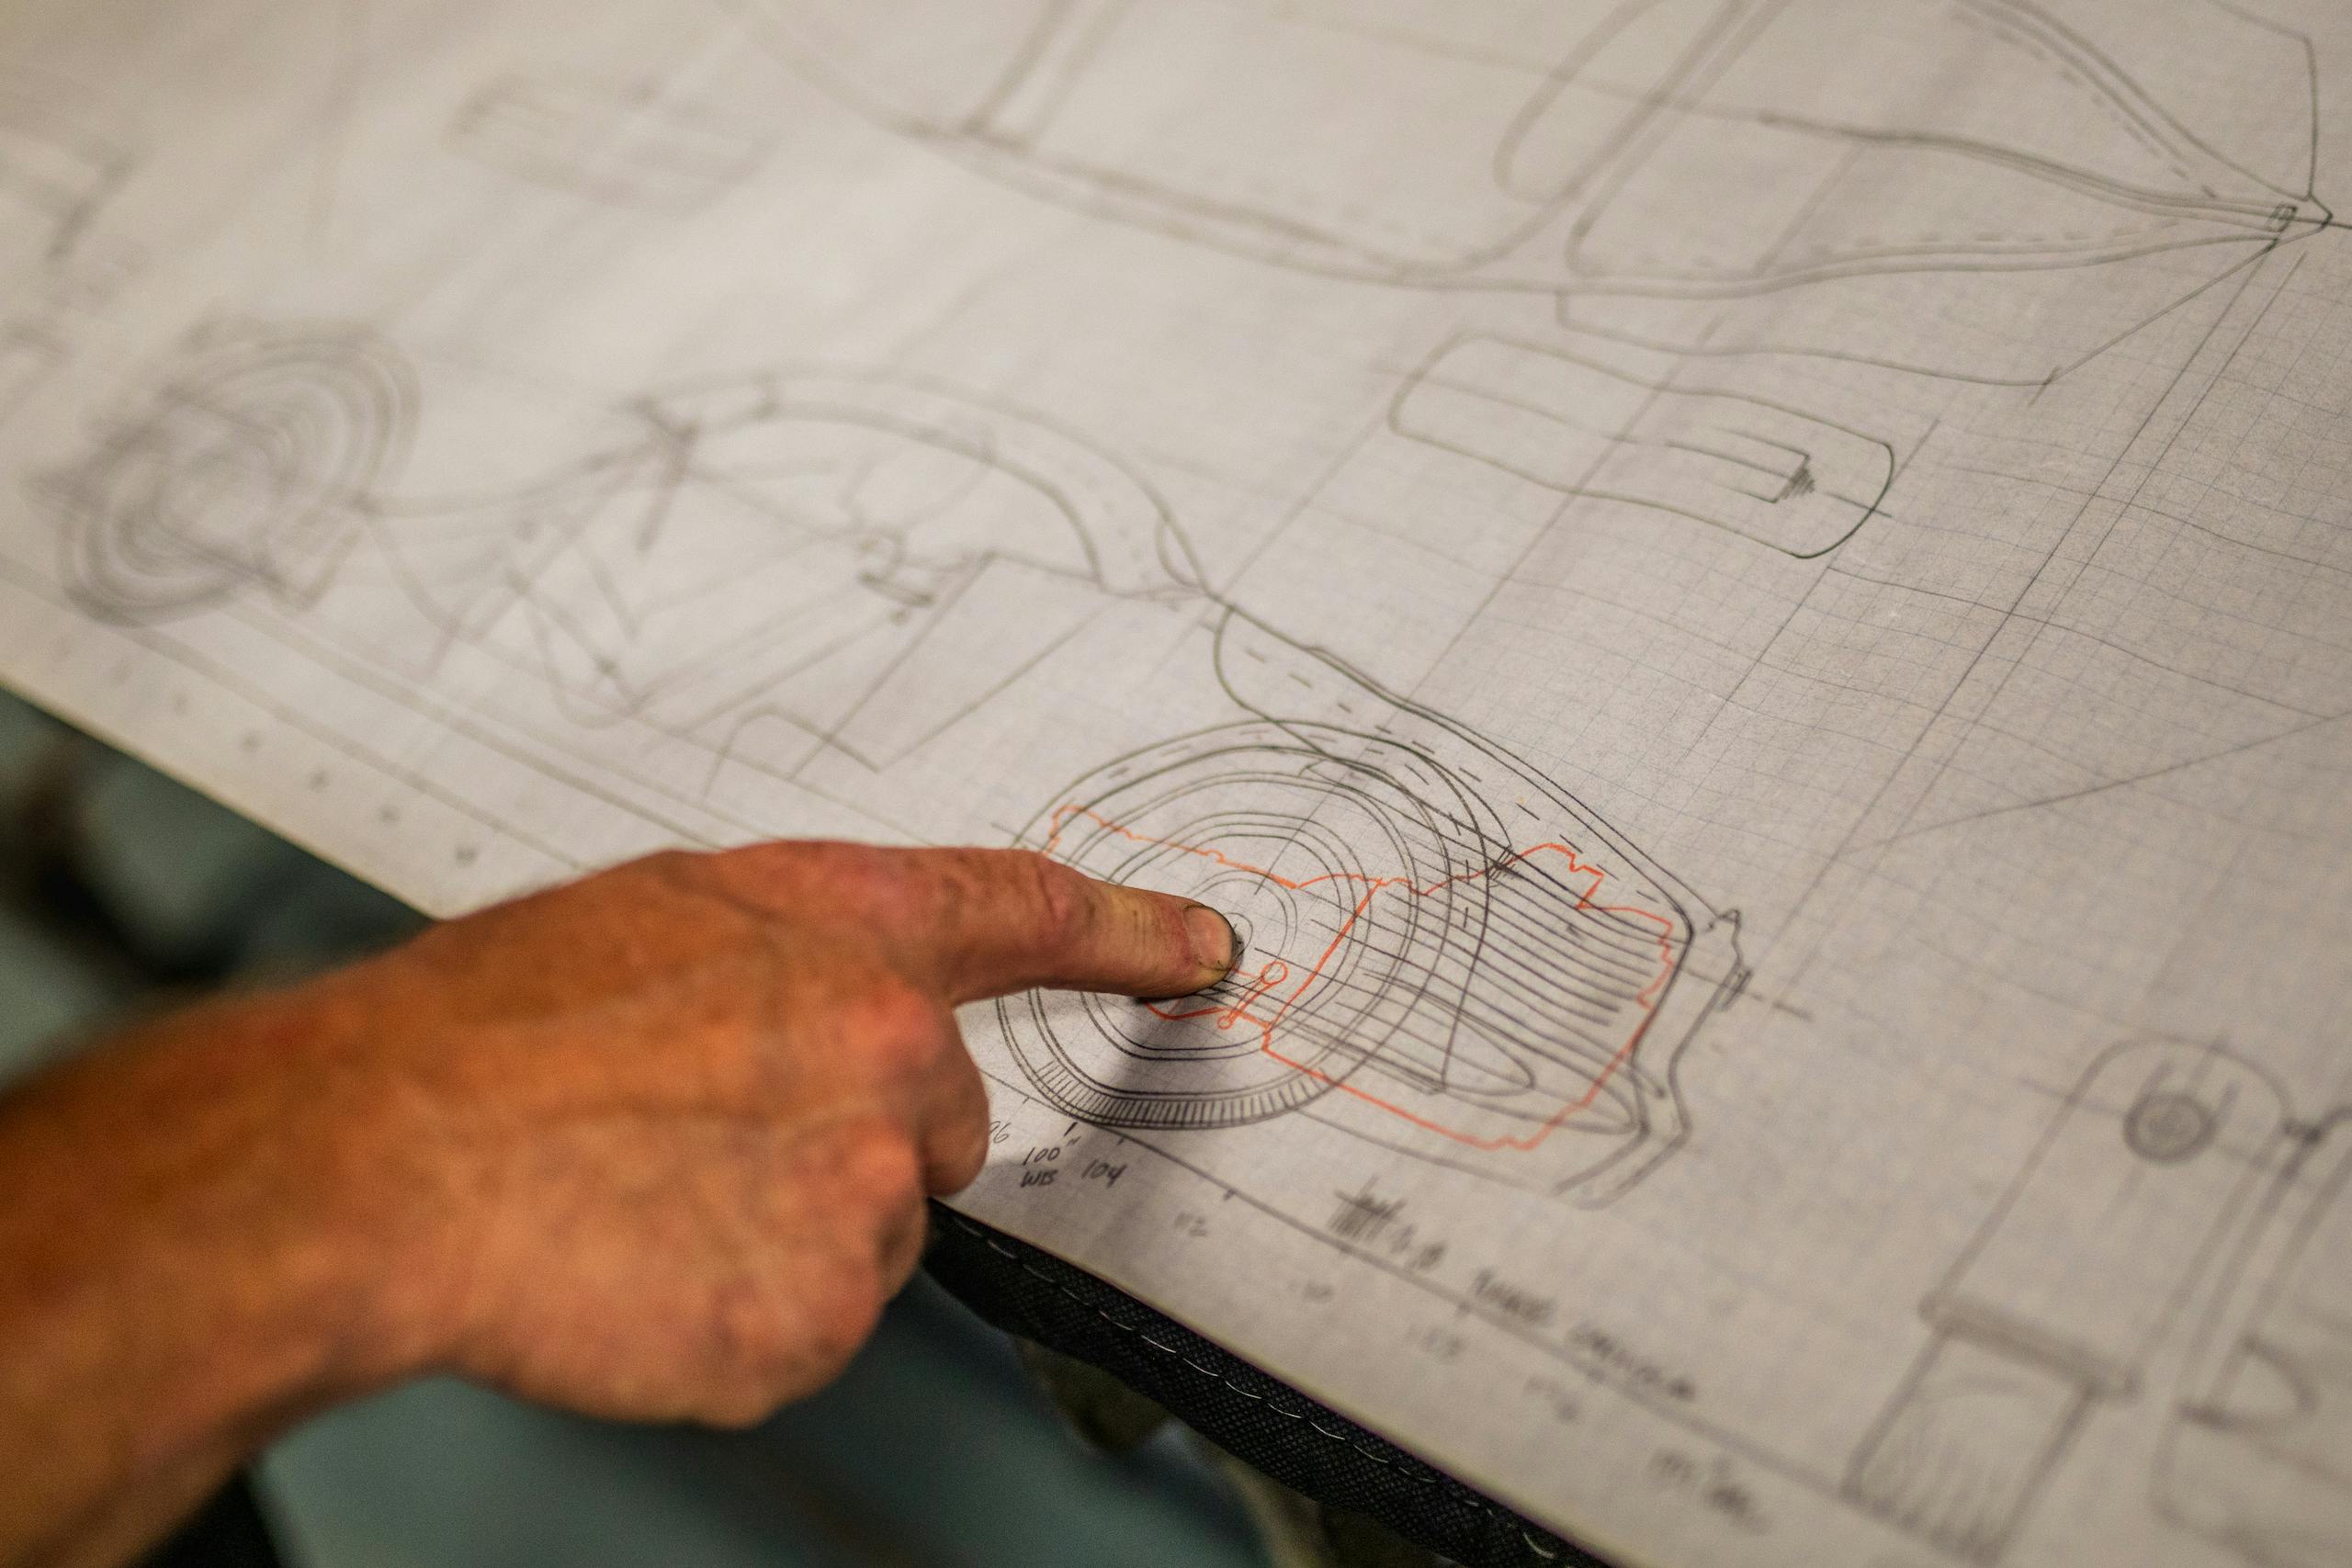 finger pointing to wheel on design drawing